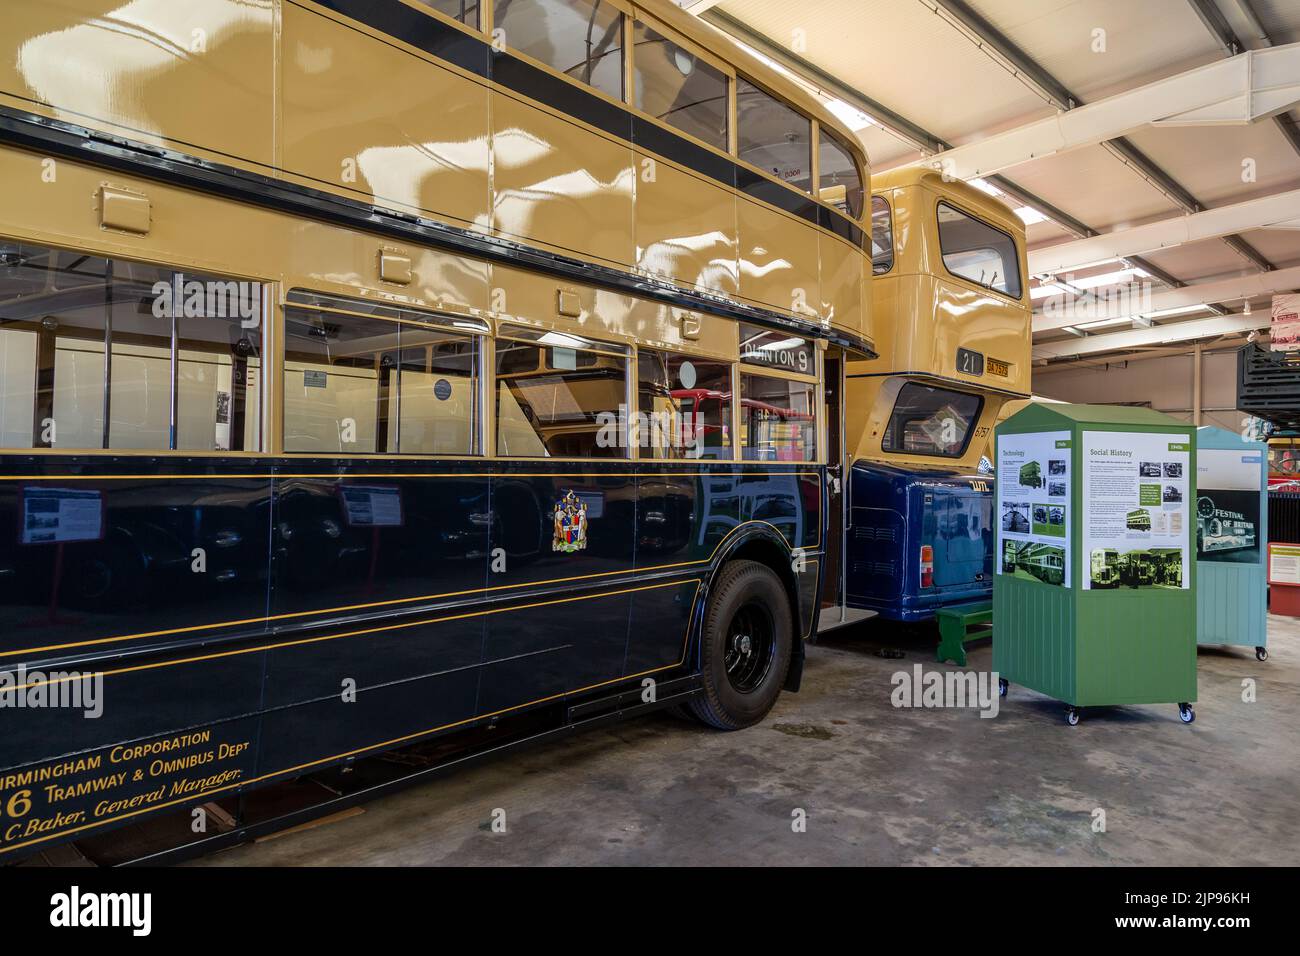 Vintage buses on display at The Transport Museum in Wythall, Worcestershire, England. Stock Photo